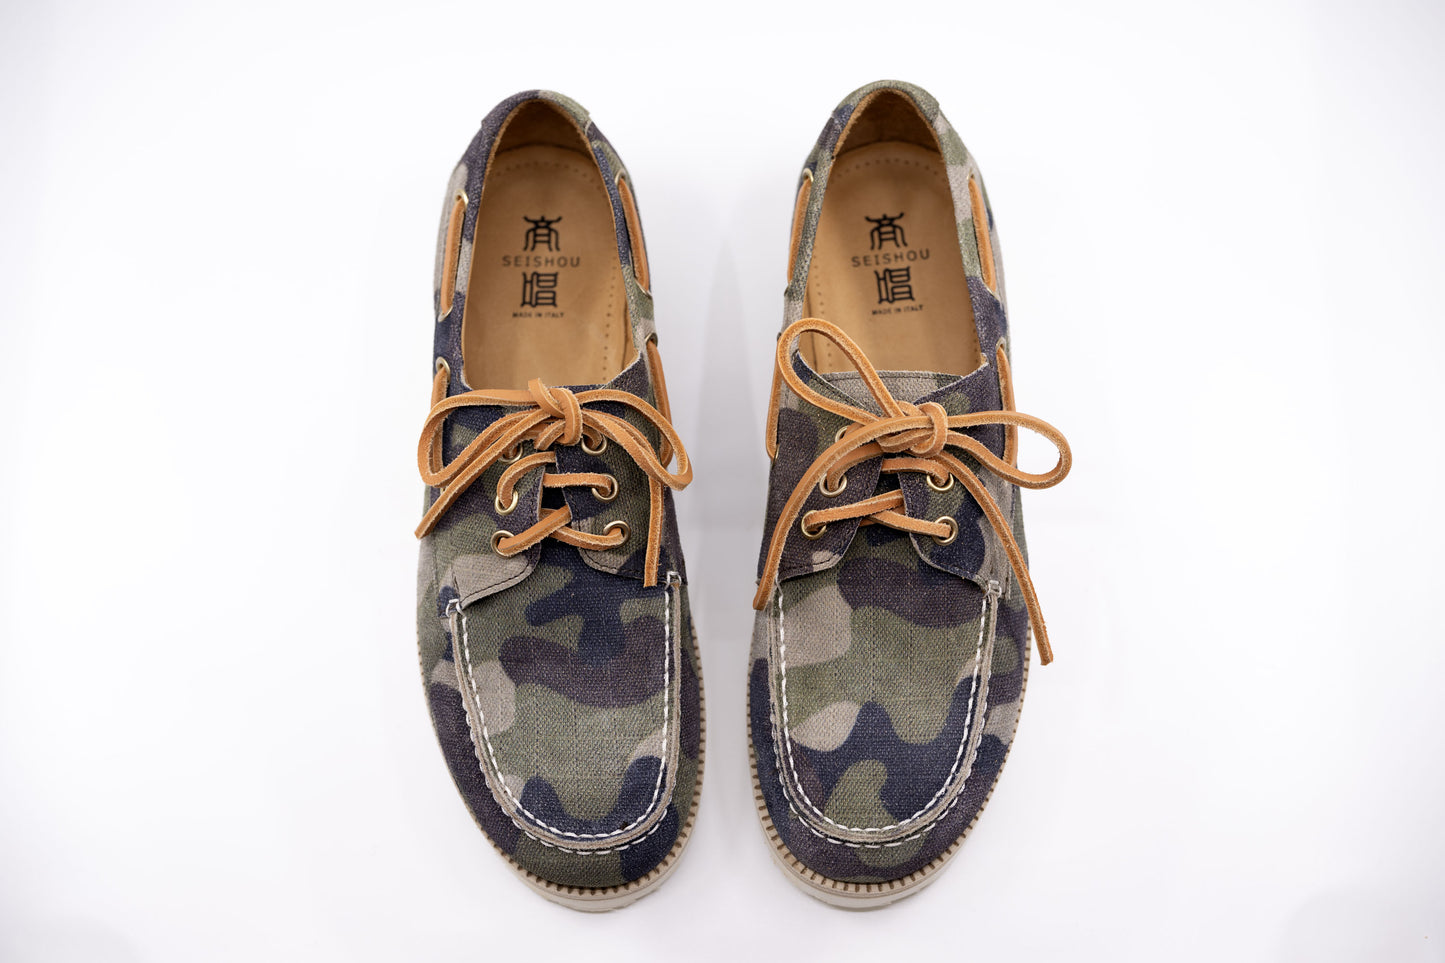 Hopkins Women's Boat Shoes - Camouflage